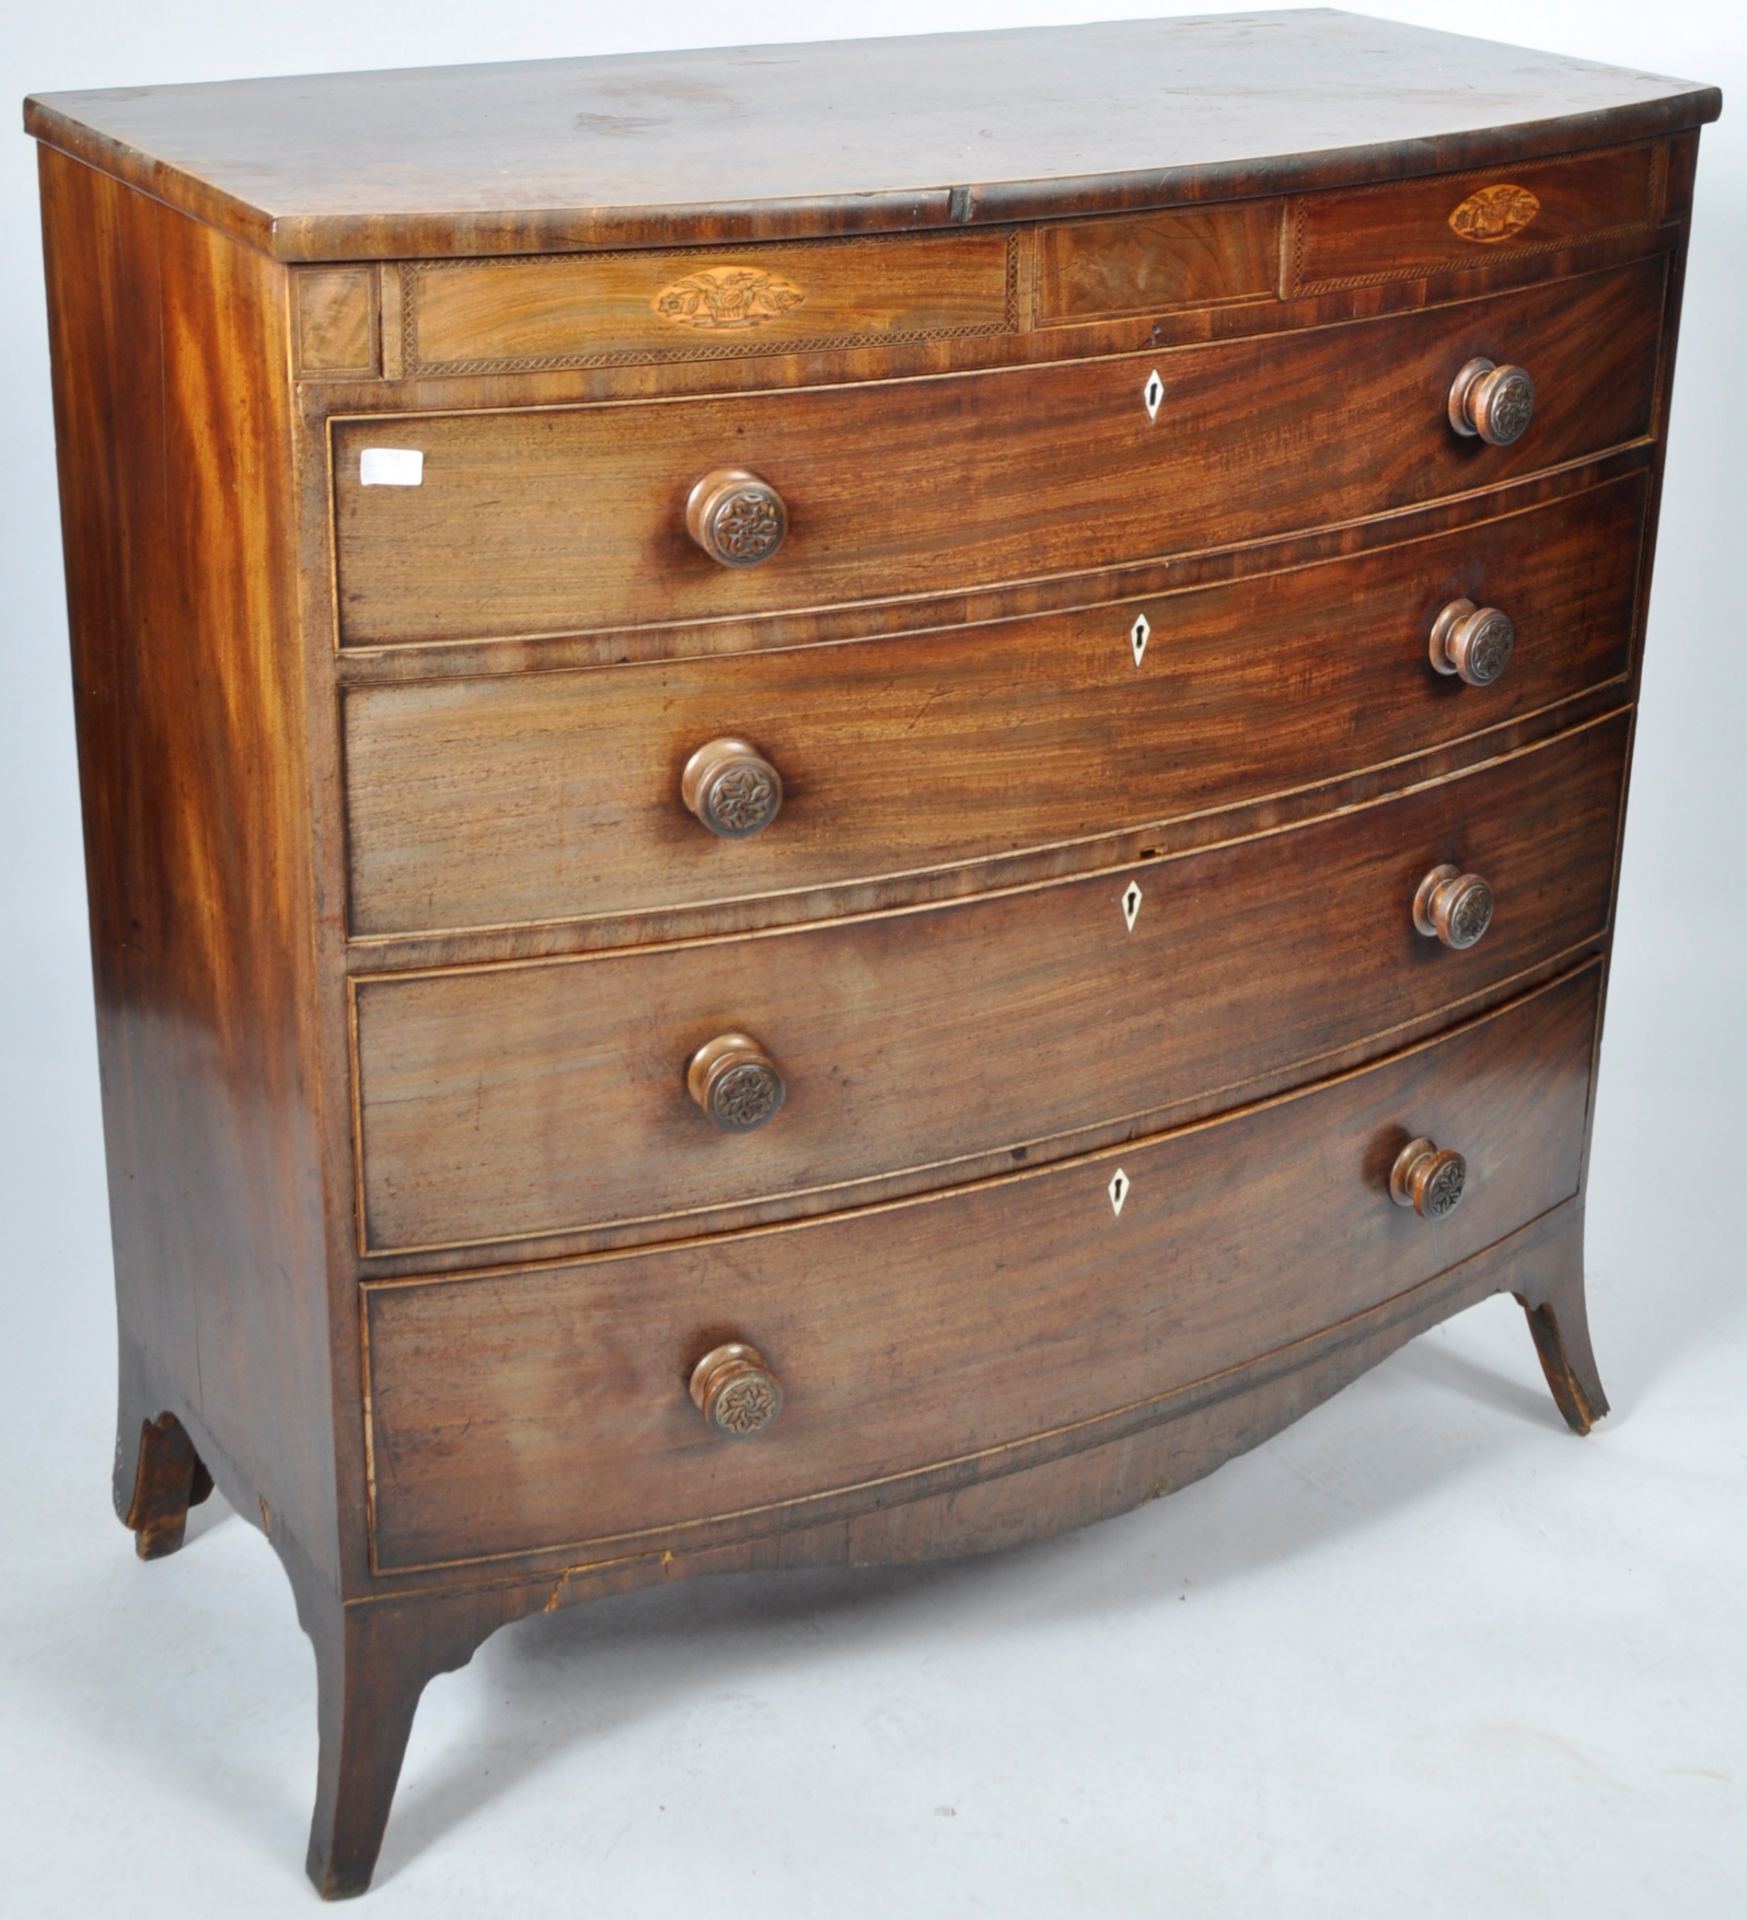 ANTIQUE 19TH CENTURY MAHOGANY BOW FRONT CHEST OF DRAWERS - Image 2 of 10